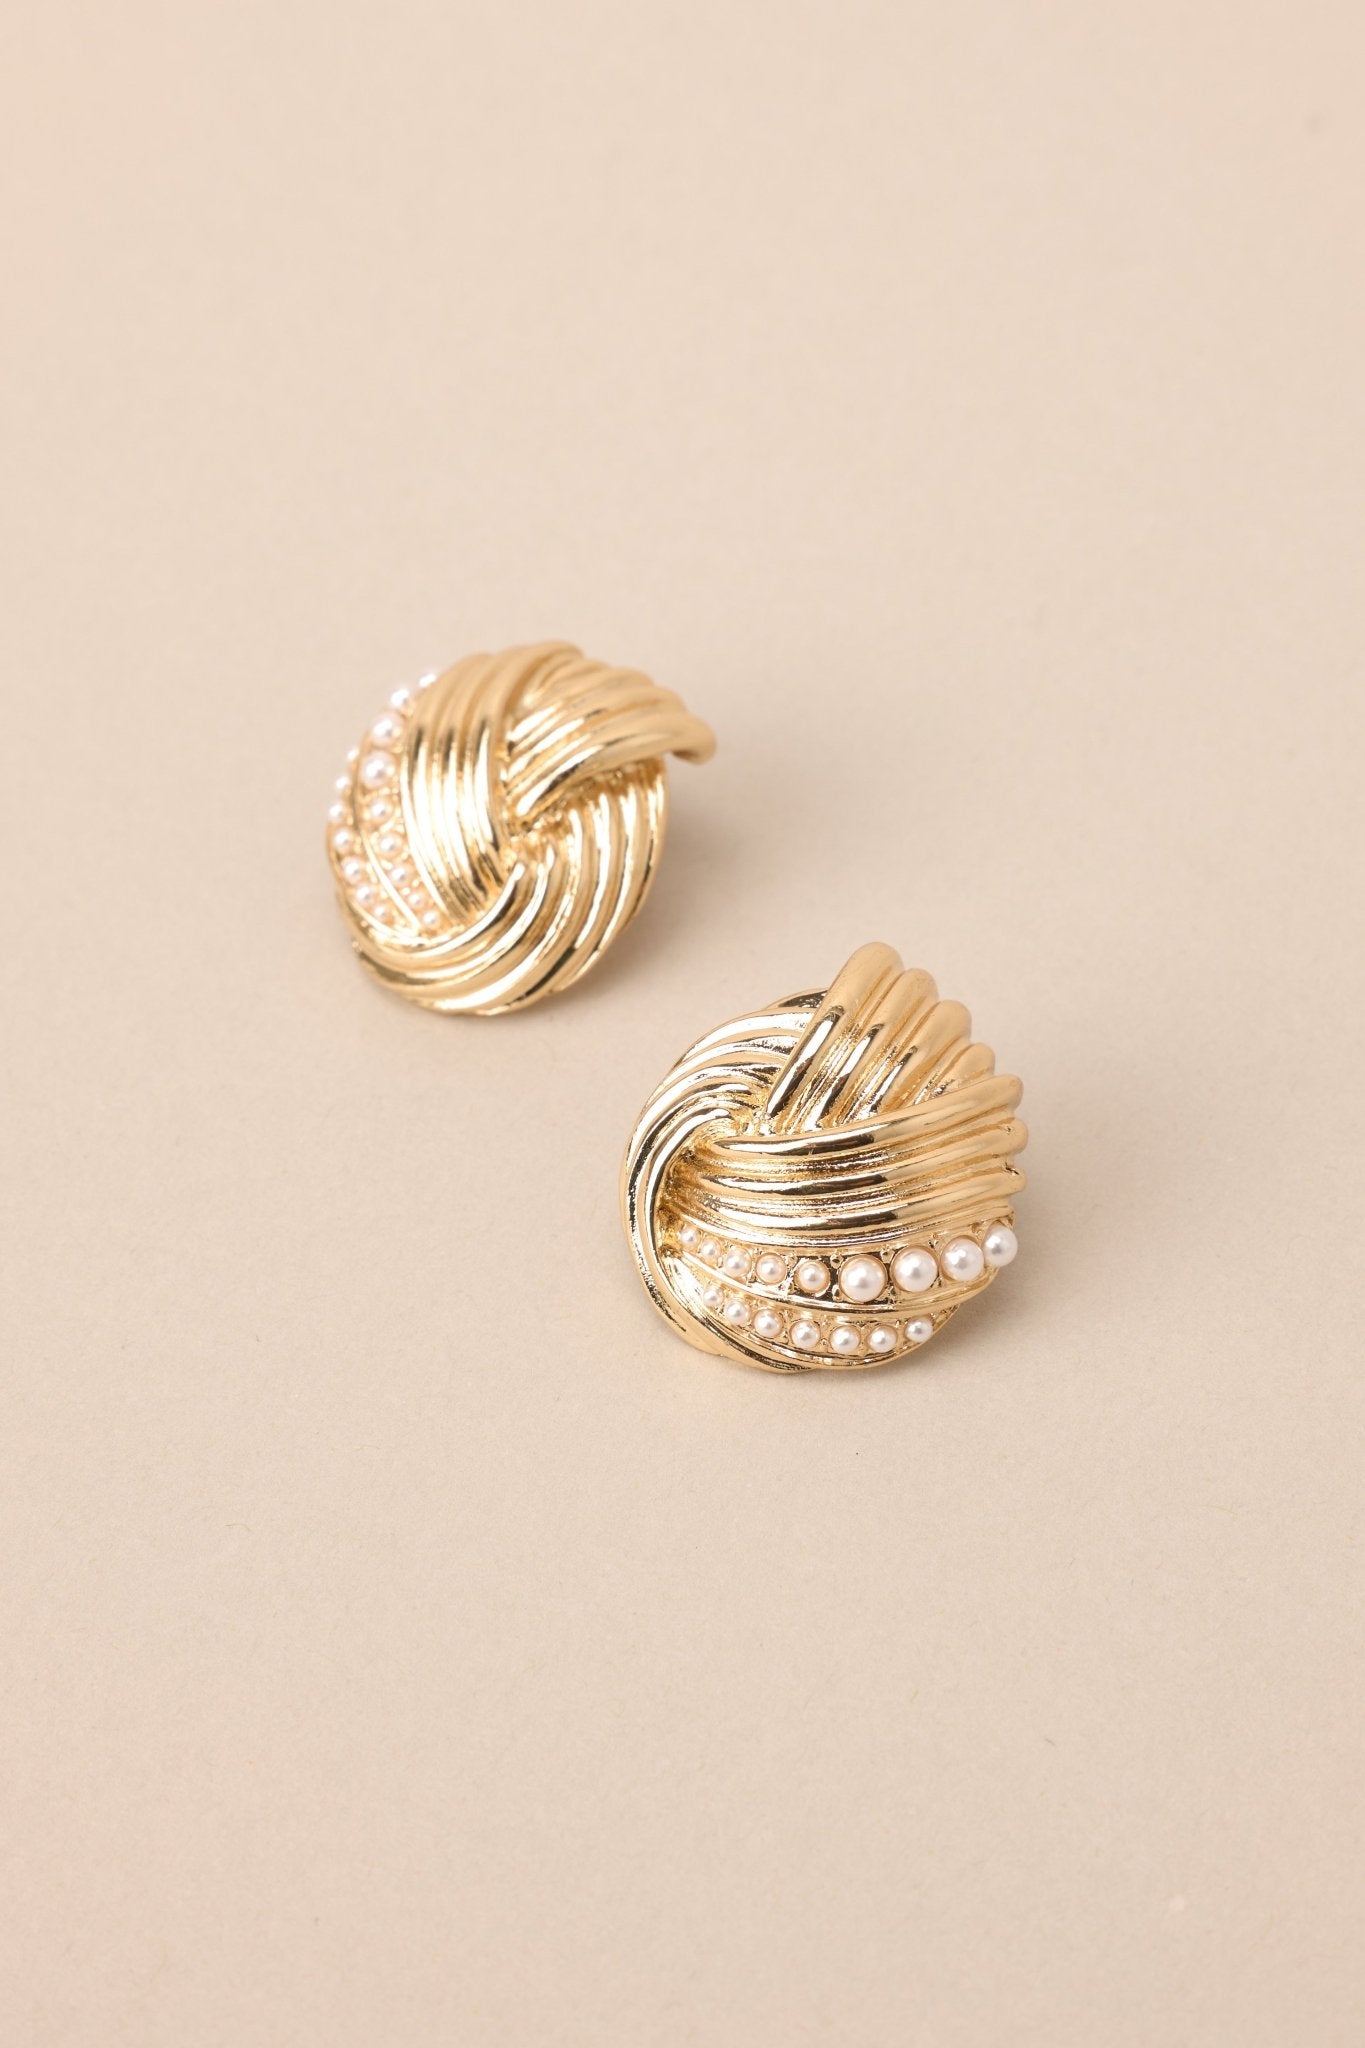 Close up view of these gold earrings with intertwined design and small faux pearl detailing, secure post backings.